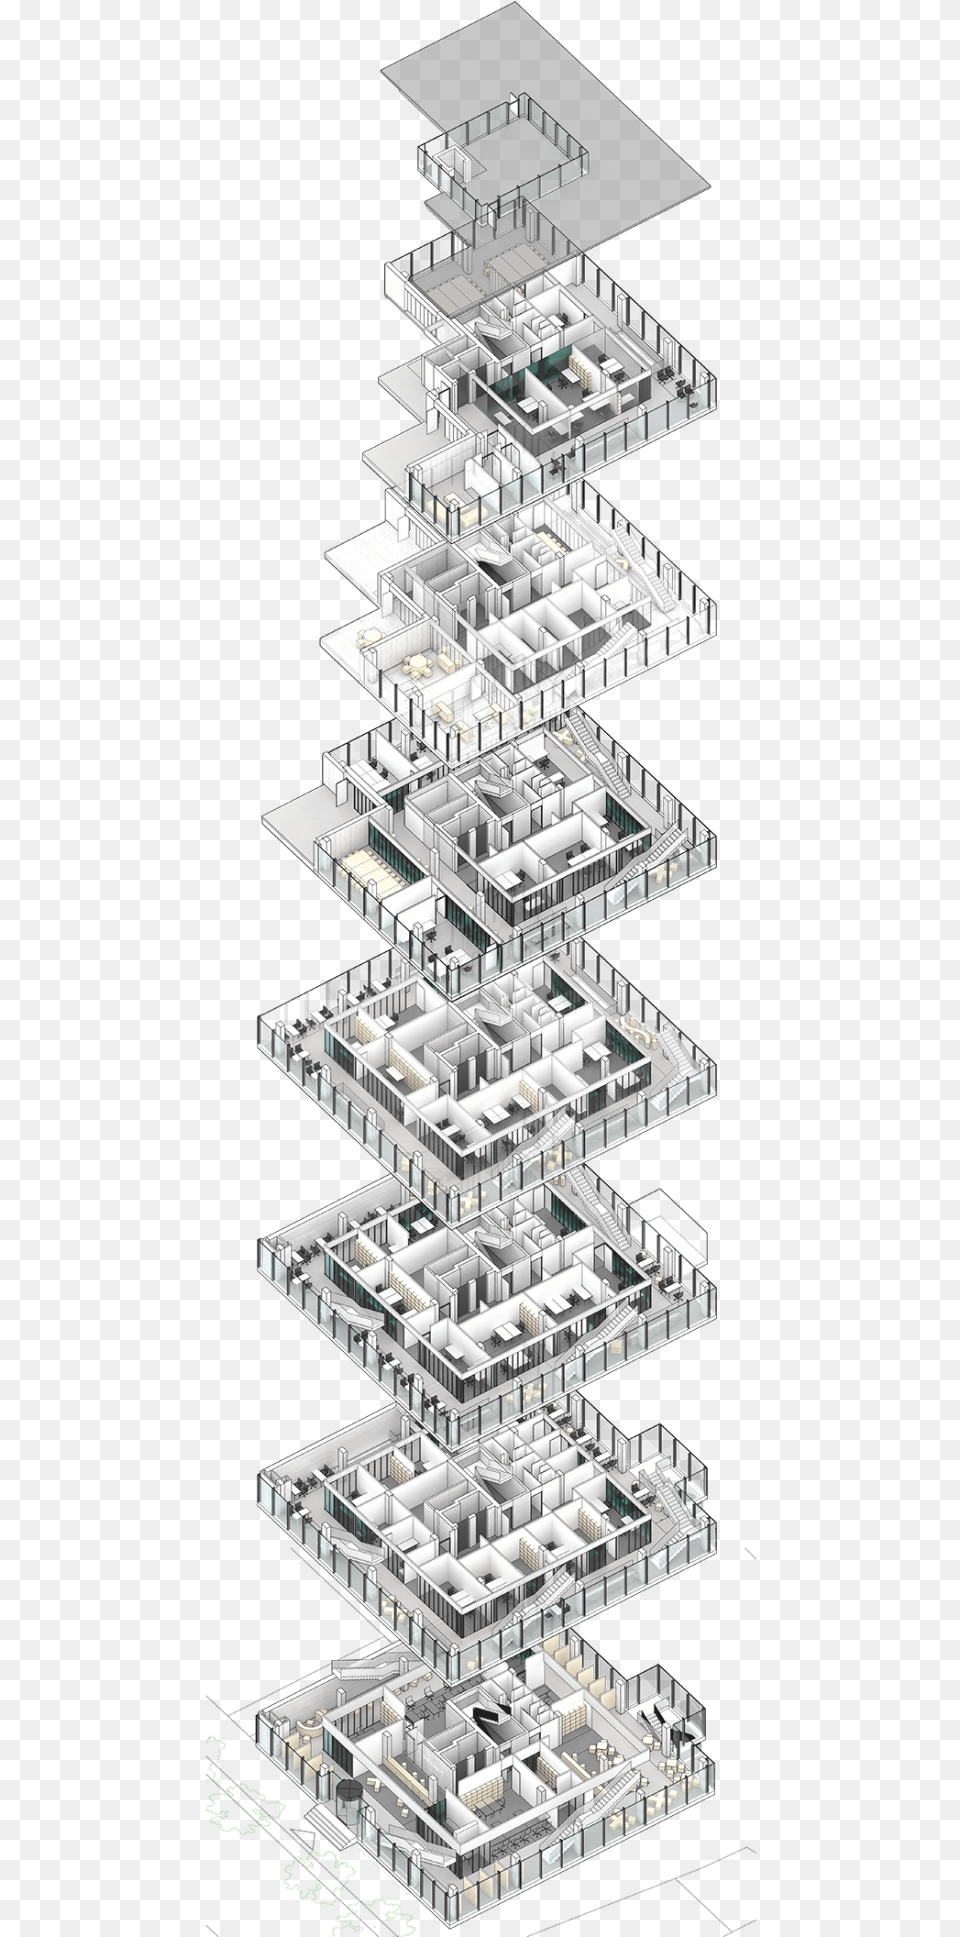 Architects For Urbanity New Town Hall, City, Urban, Architecture, Building Free Transparent Png